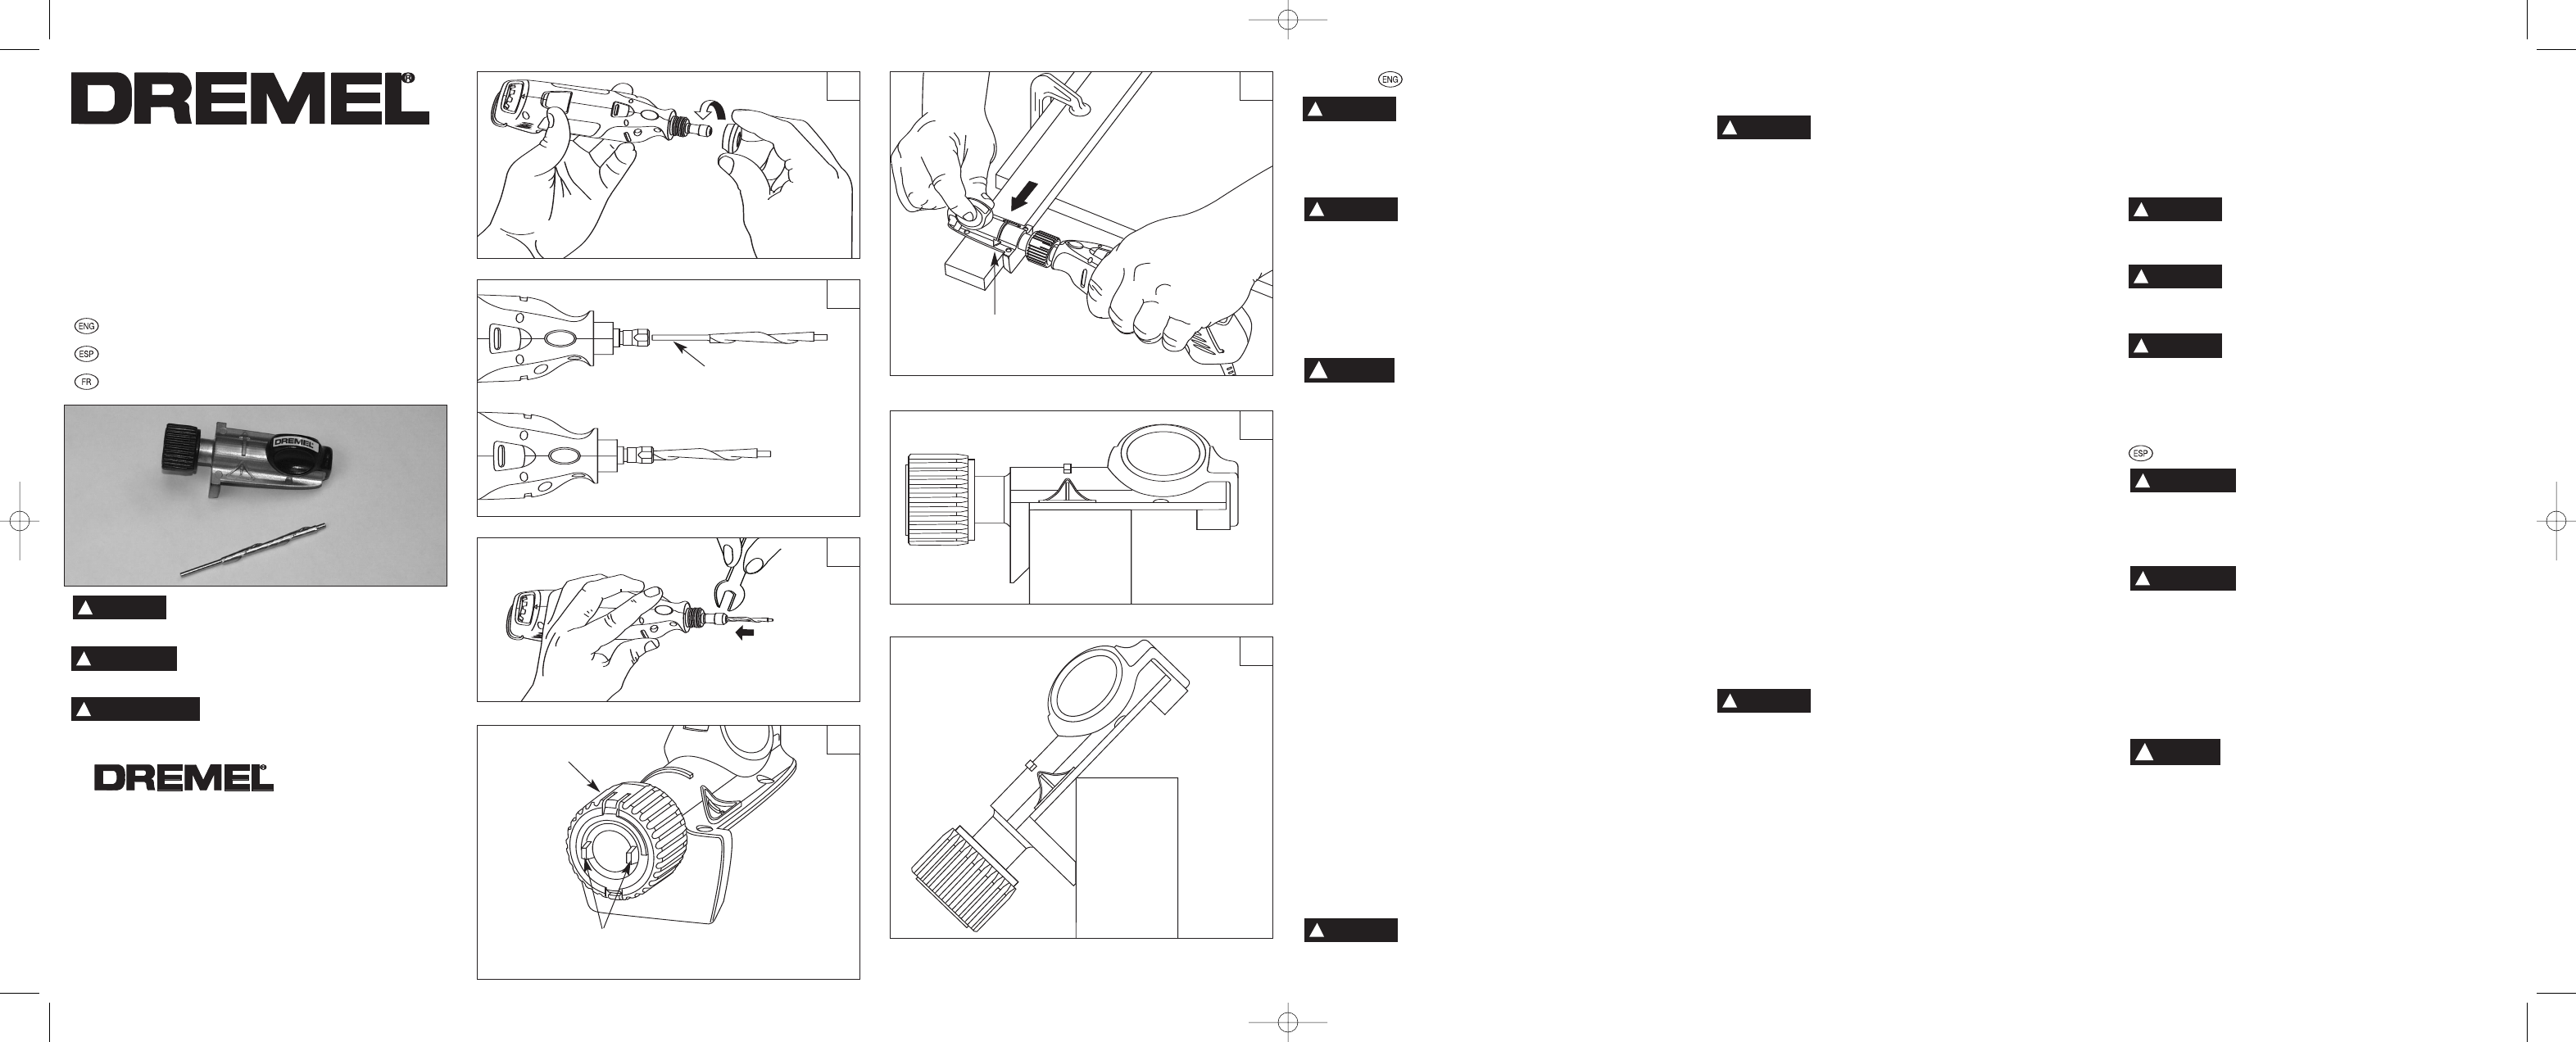 How do you find a Dremel tool manual?